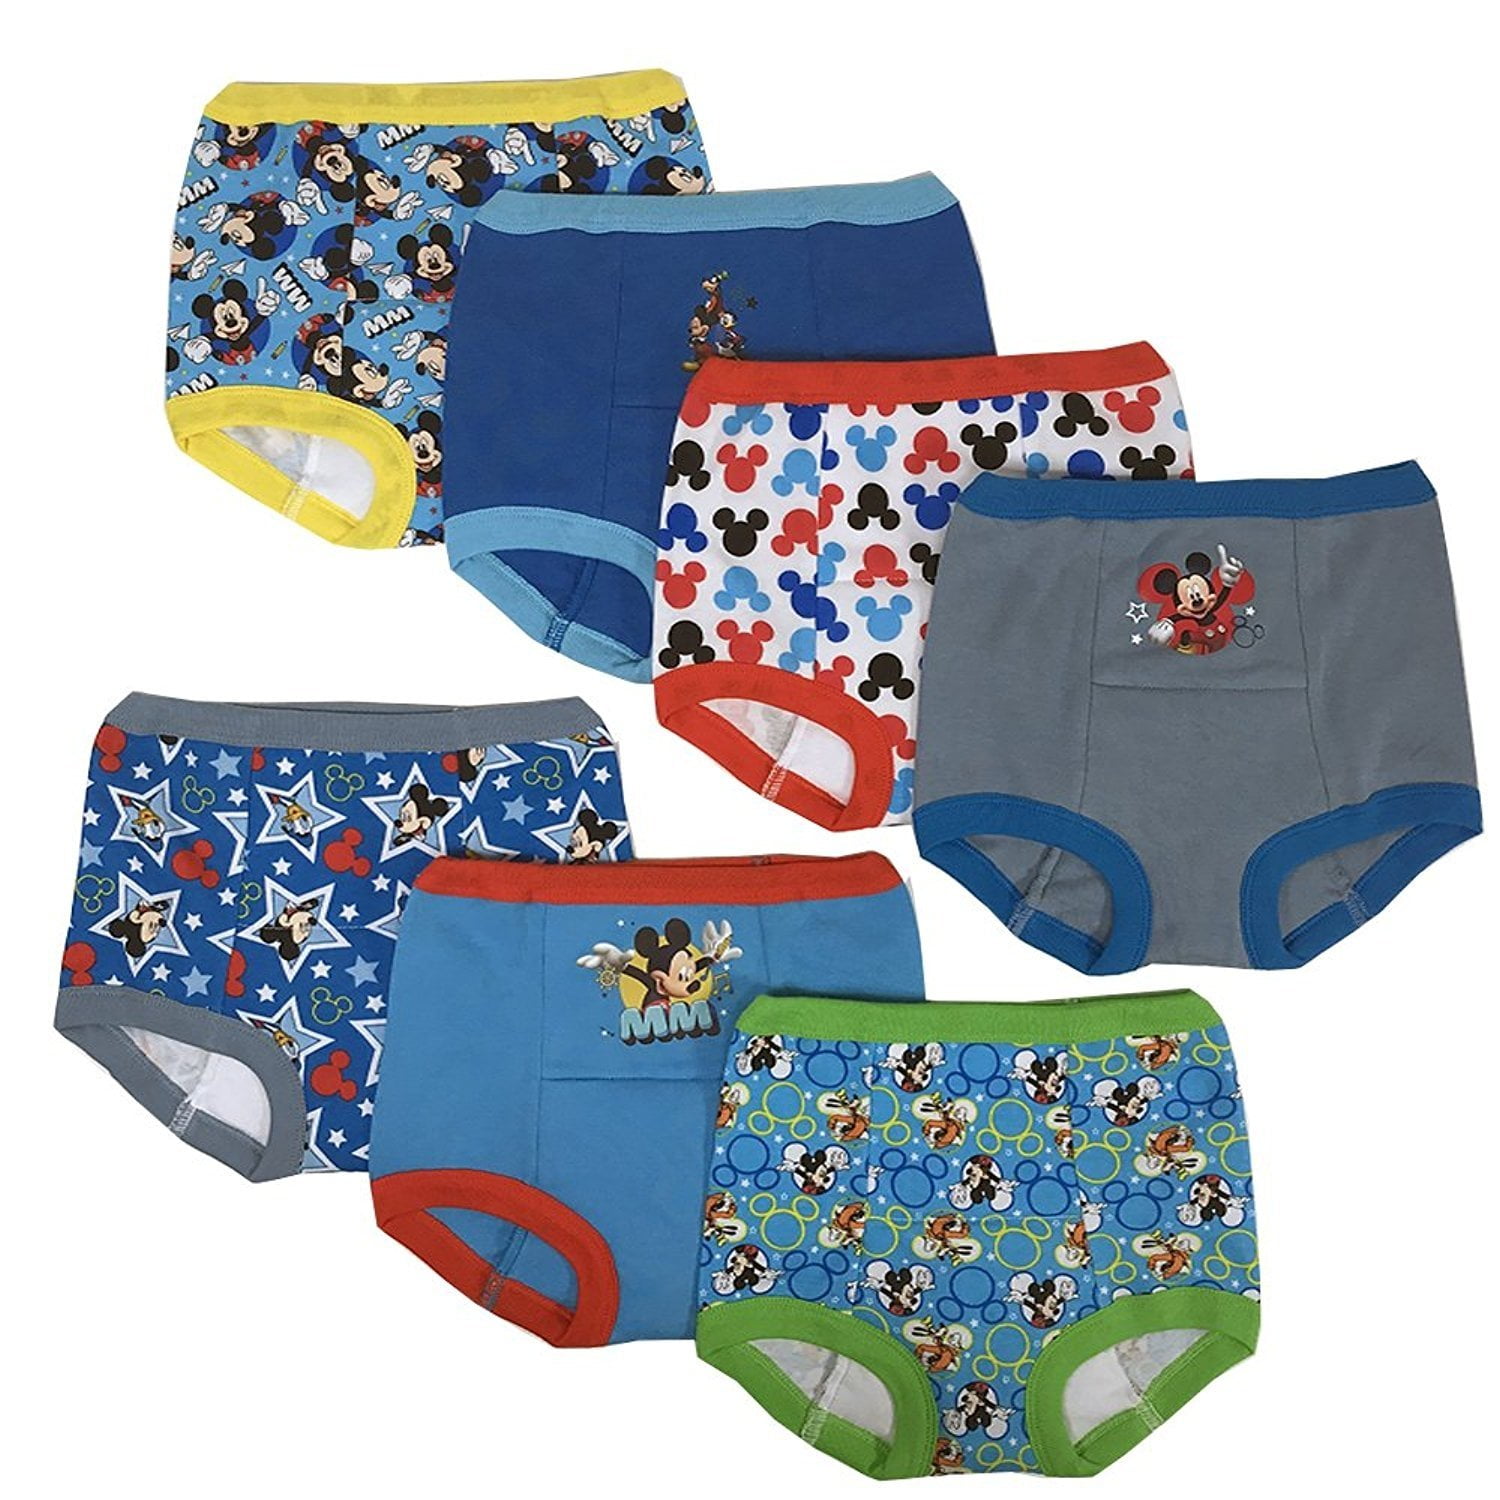 Briefs Childrens Underwear 2 to 4 Years Baby Boys Toddler Underpants Trunks Multipack of 5 100% Soft Cotton Pants Disney Mickey Mouse Boys Pants Short Boxers 